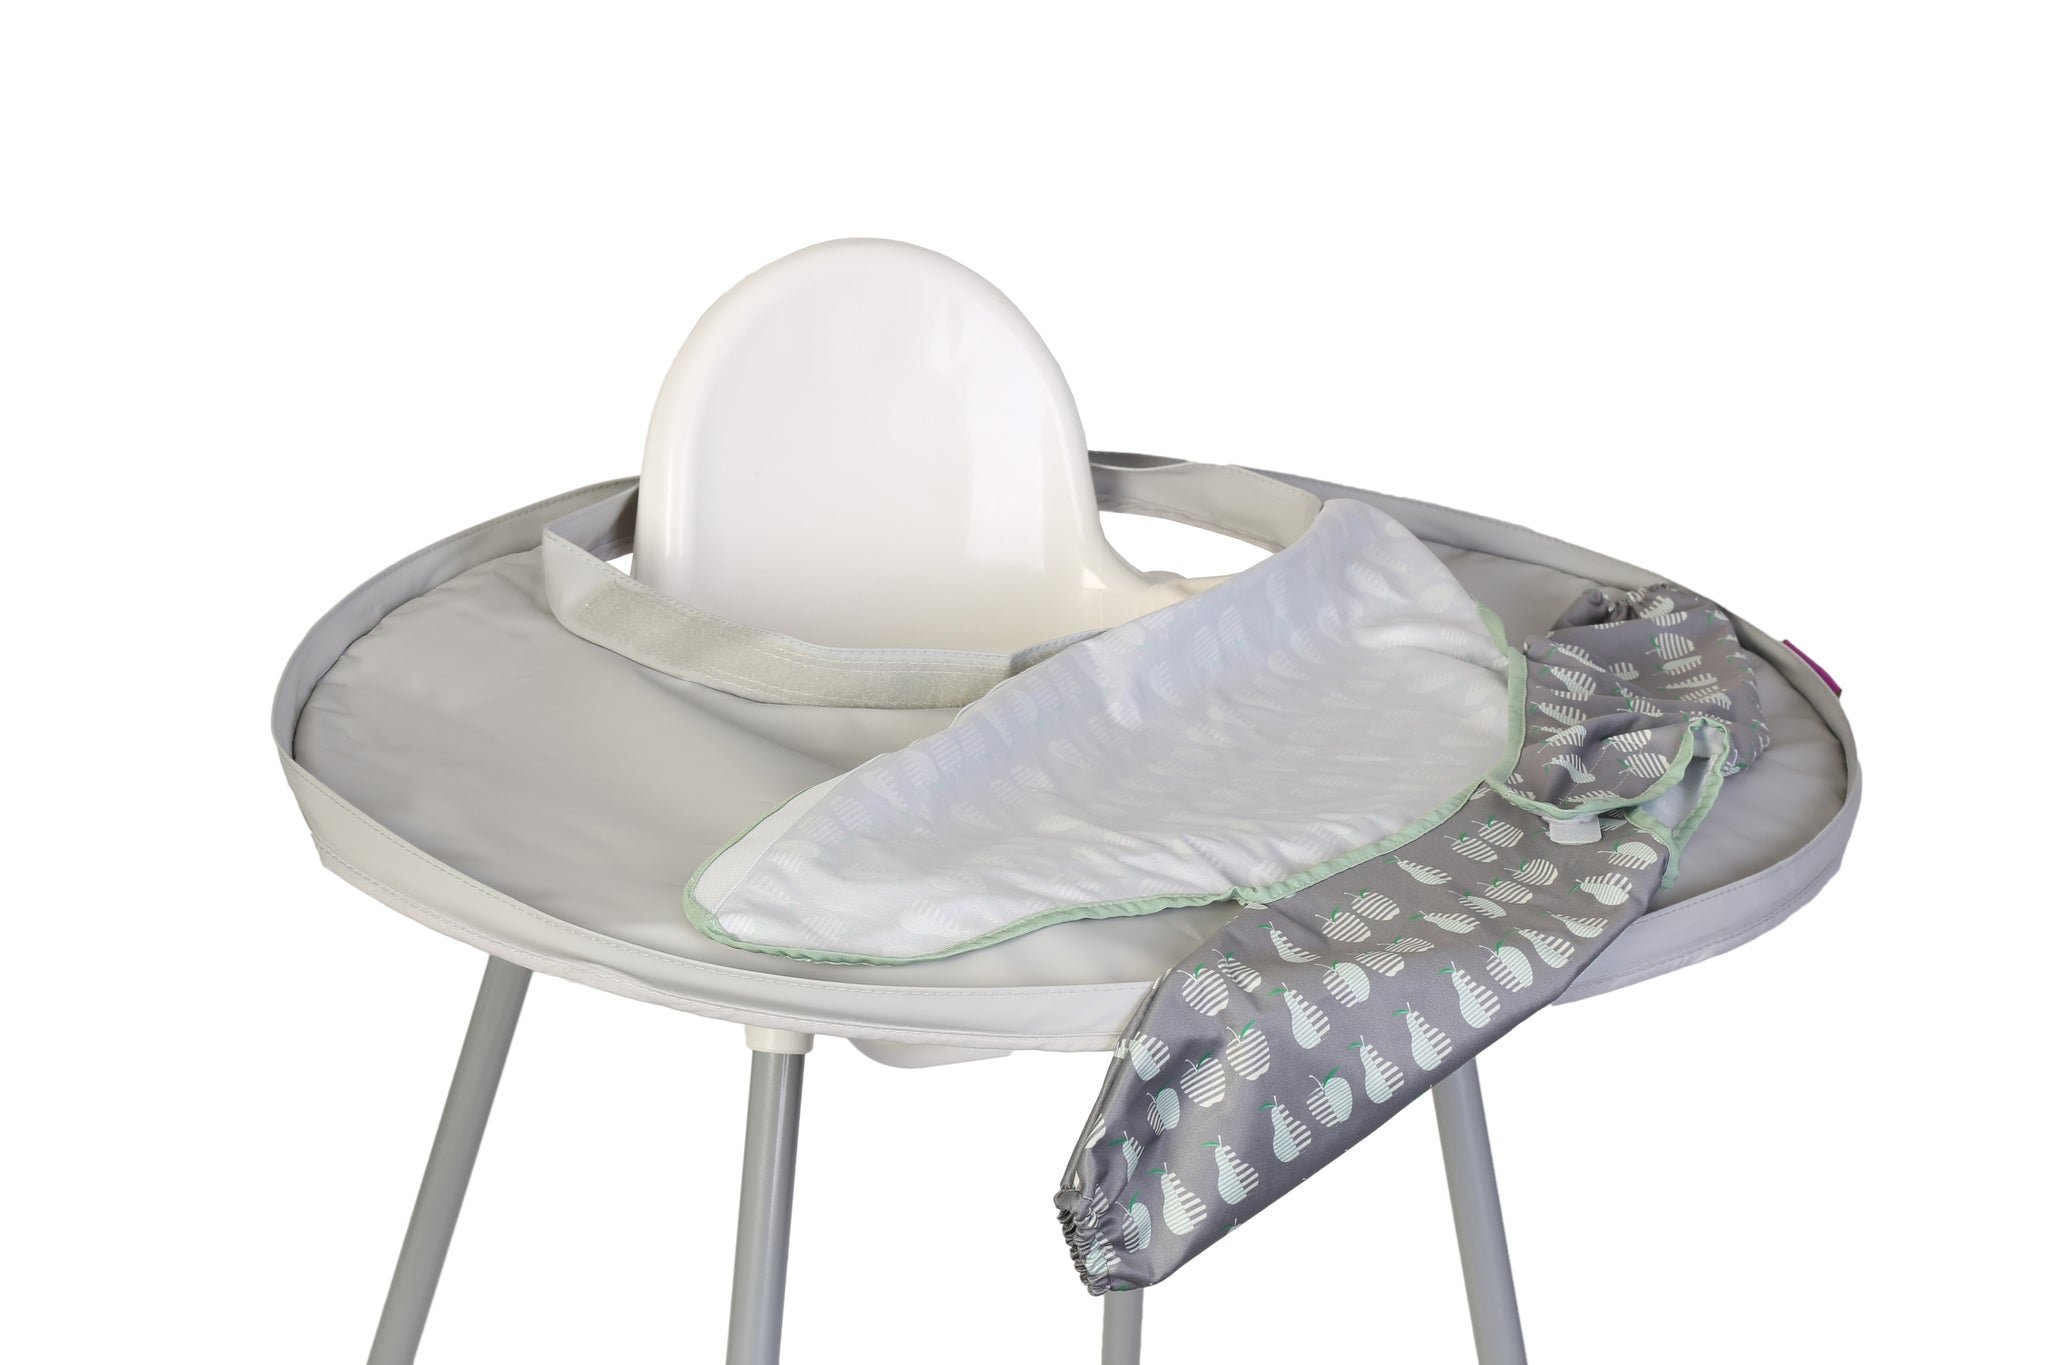 Tidy Tot All-in-One Bib And Tray Kit, Sage Green